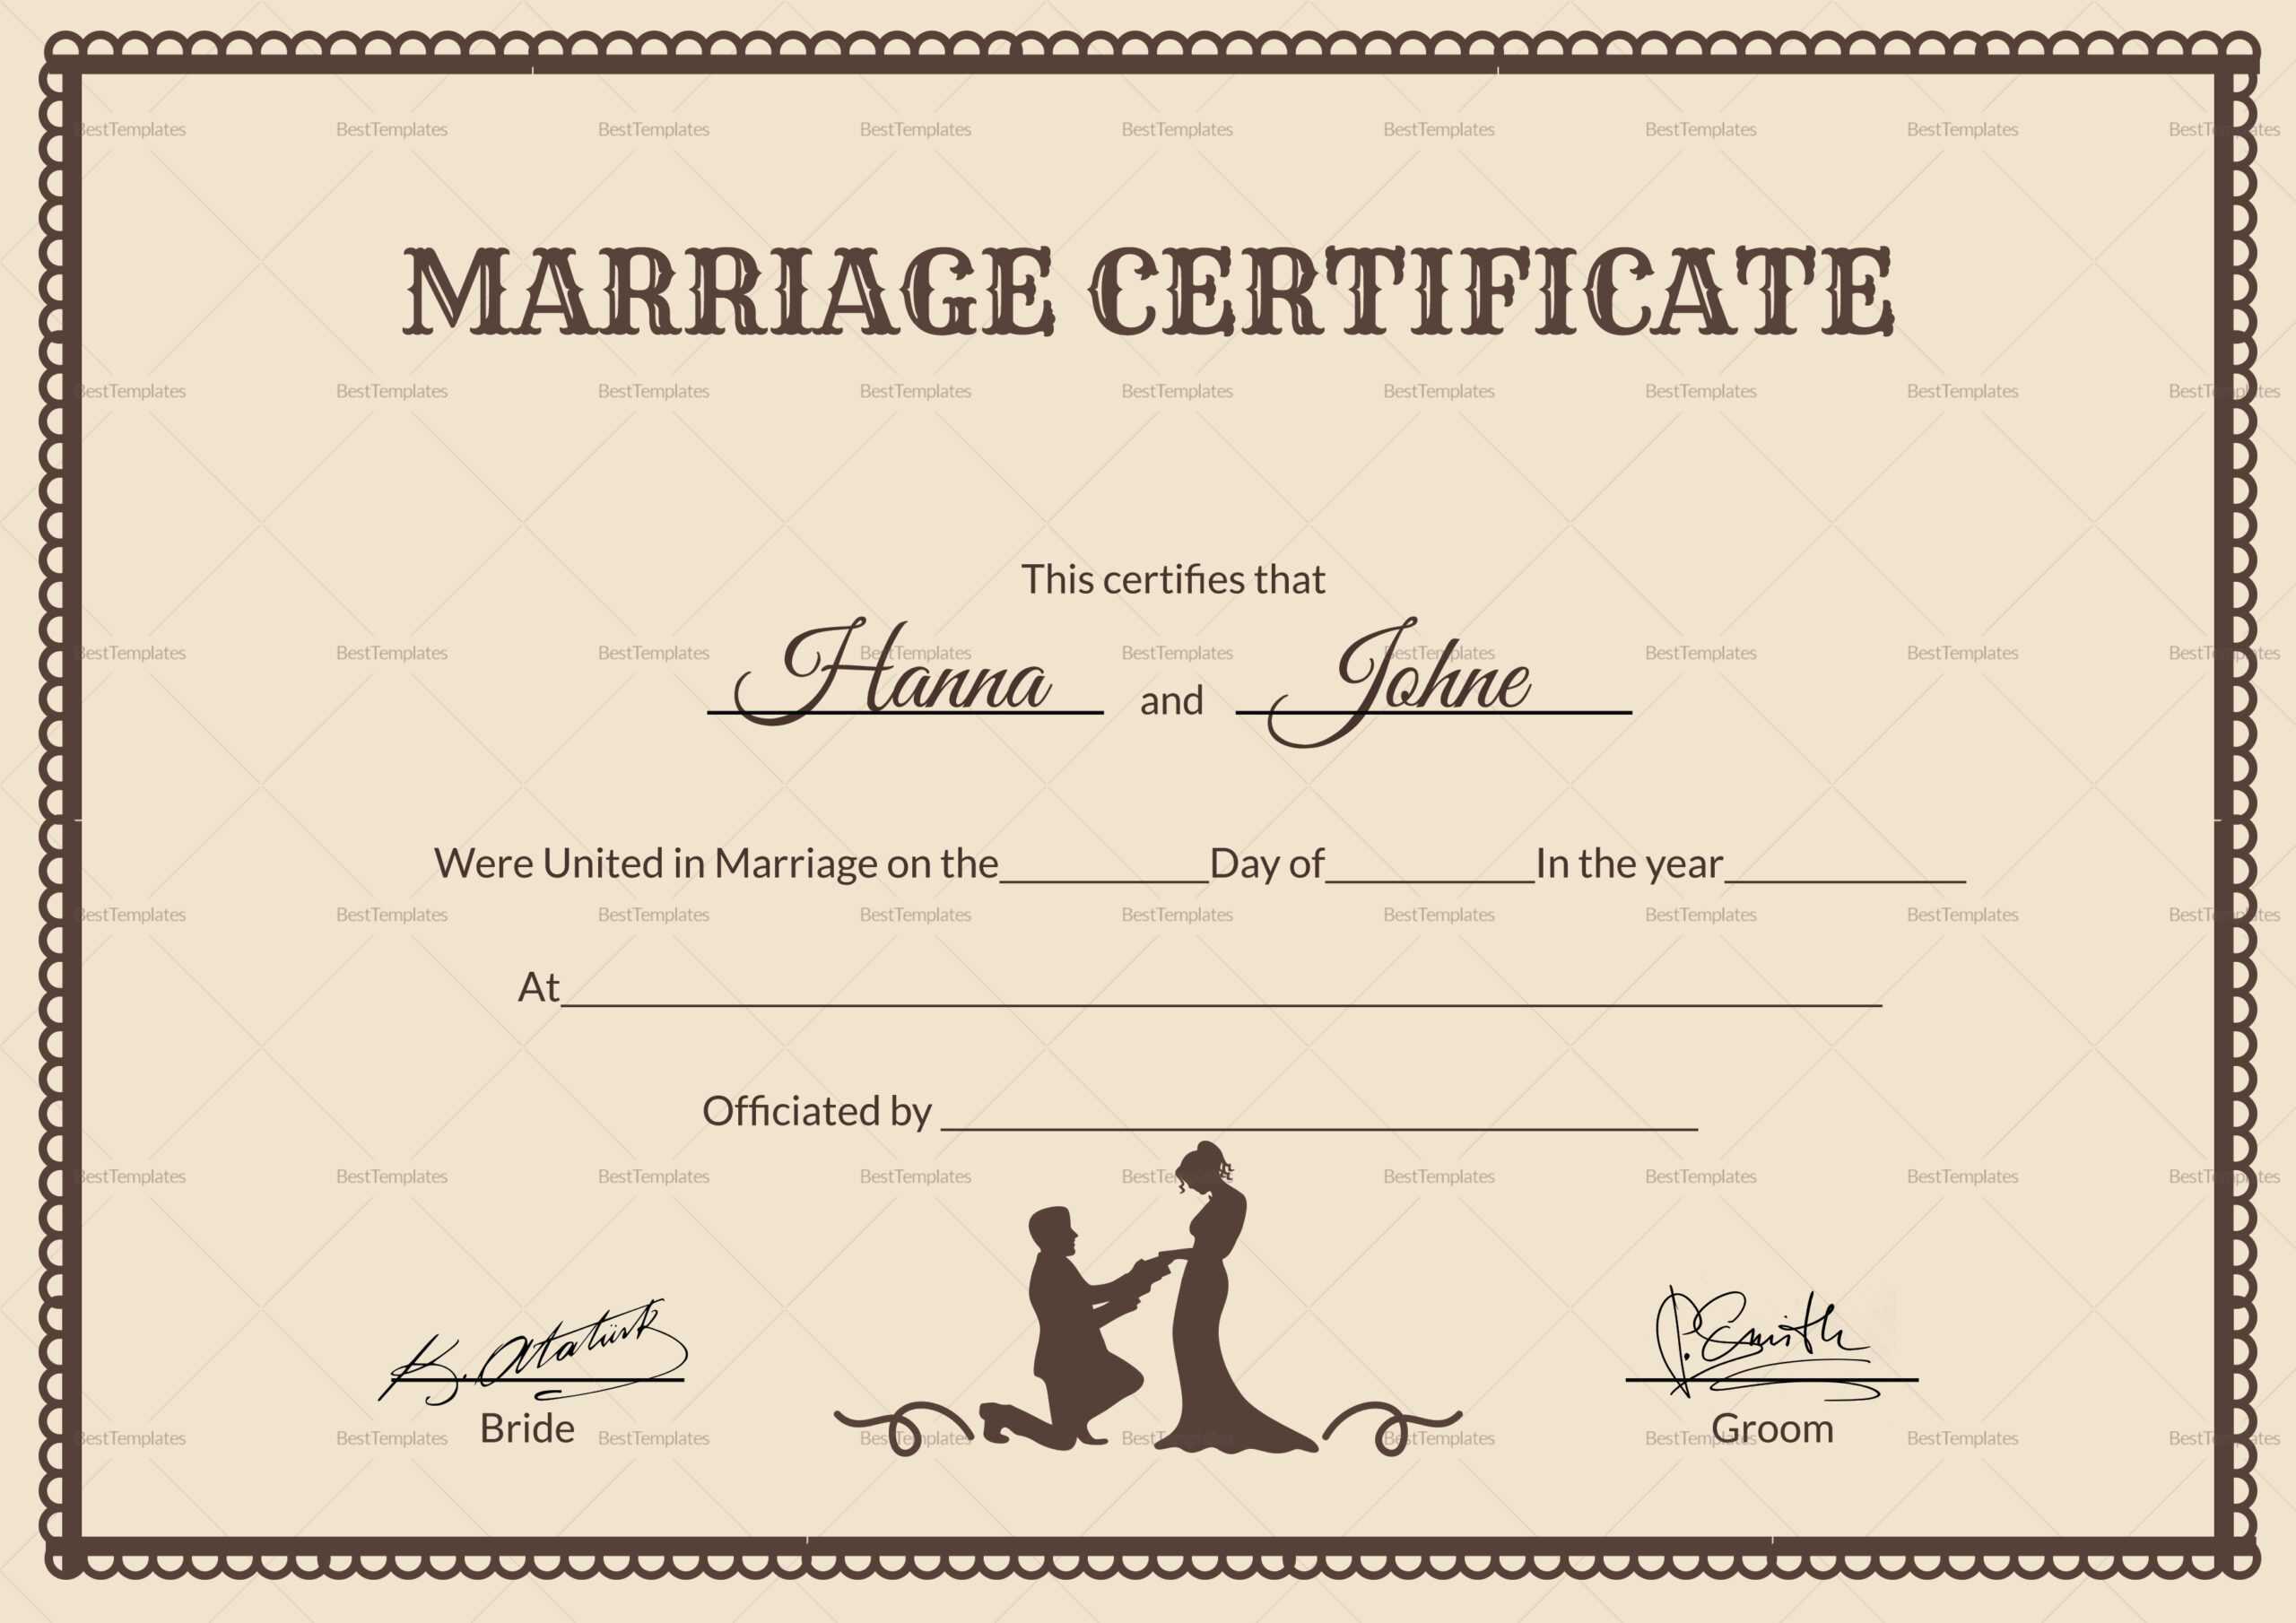 Vintage Marriage Certificate Template Throughout Certificate Of Marriage Template